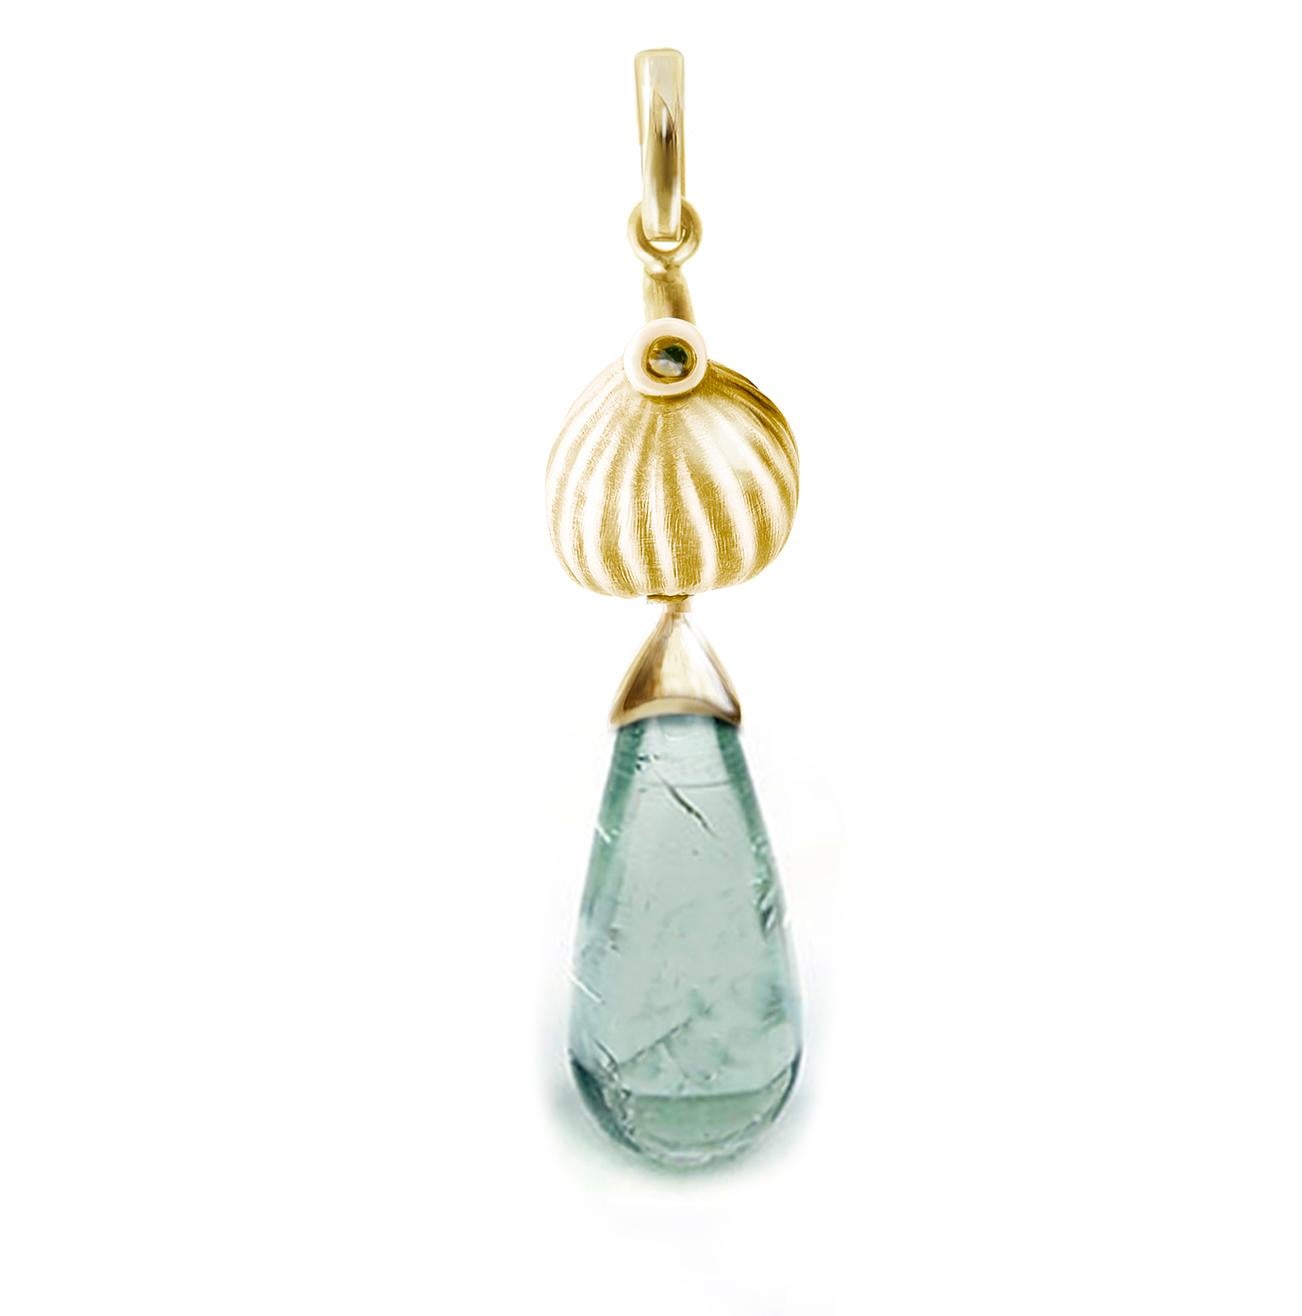 This contemporary drop Pendant Necklace is made of 18 karat yellow gold with 15.5x6 mm (4.36 carats) natural light sky blue tourmaline and round diamond. The Fig collection was featured in Vogue UA review. It was designed by the artist and oil